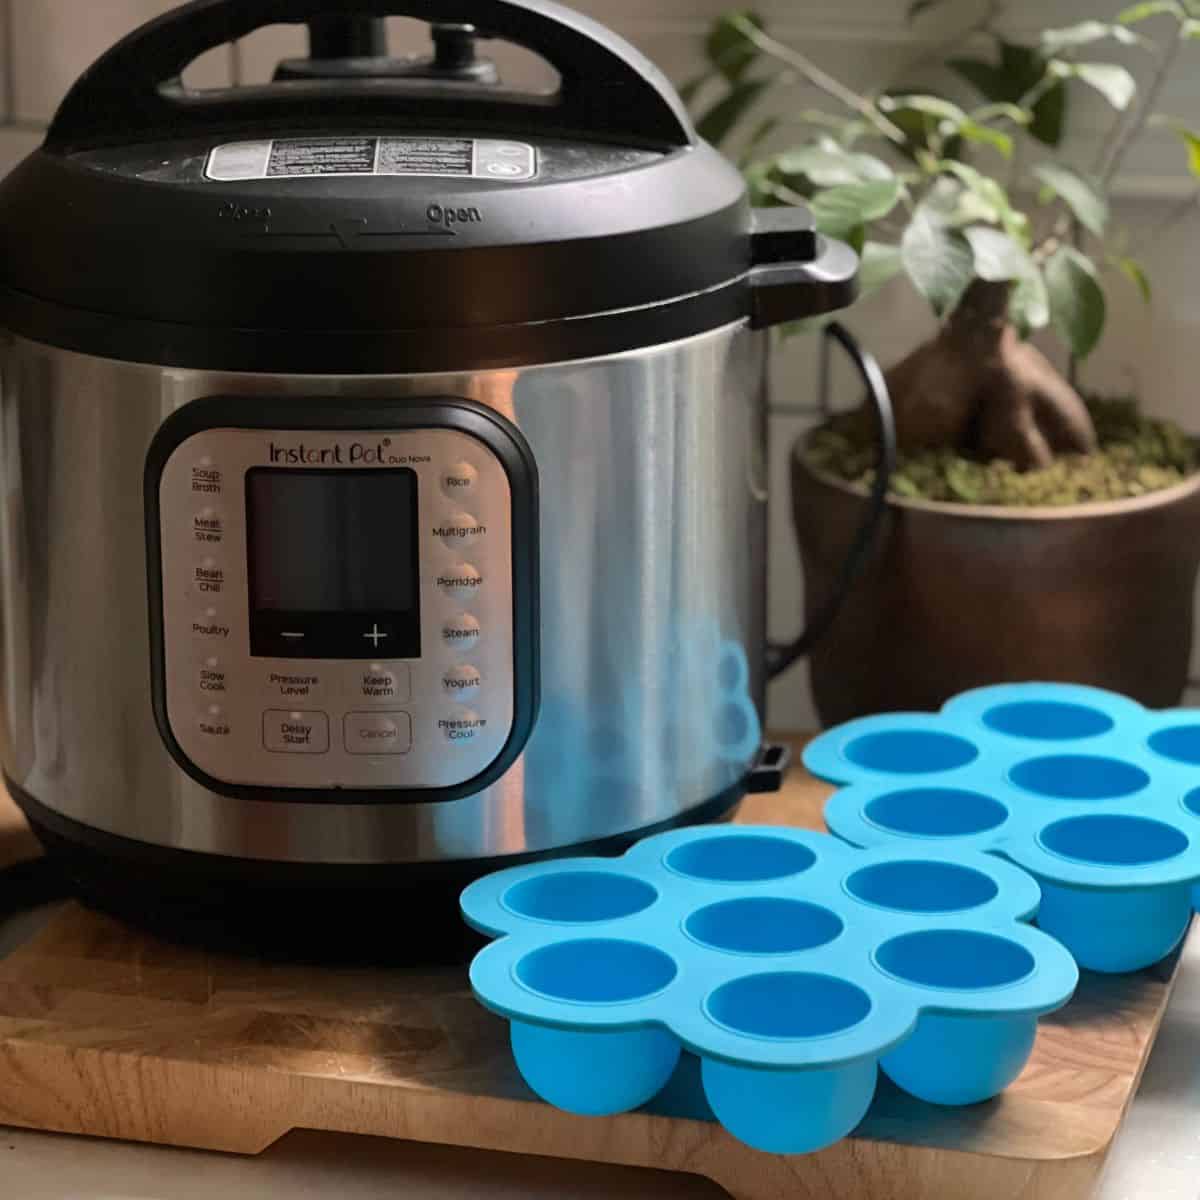 Instant Pot sitting next to blue silicone molds